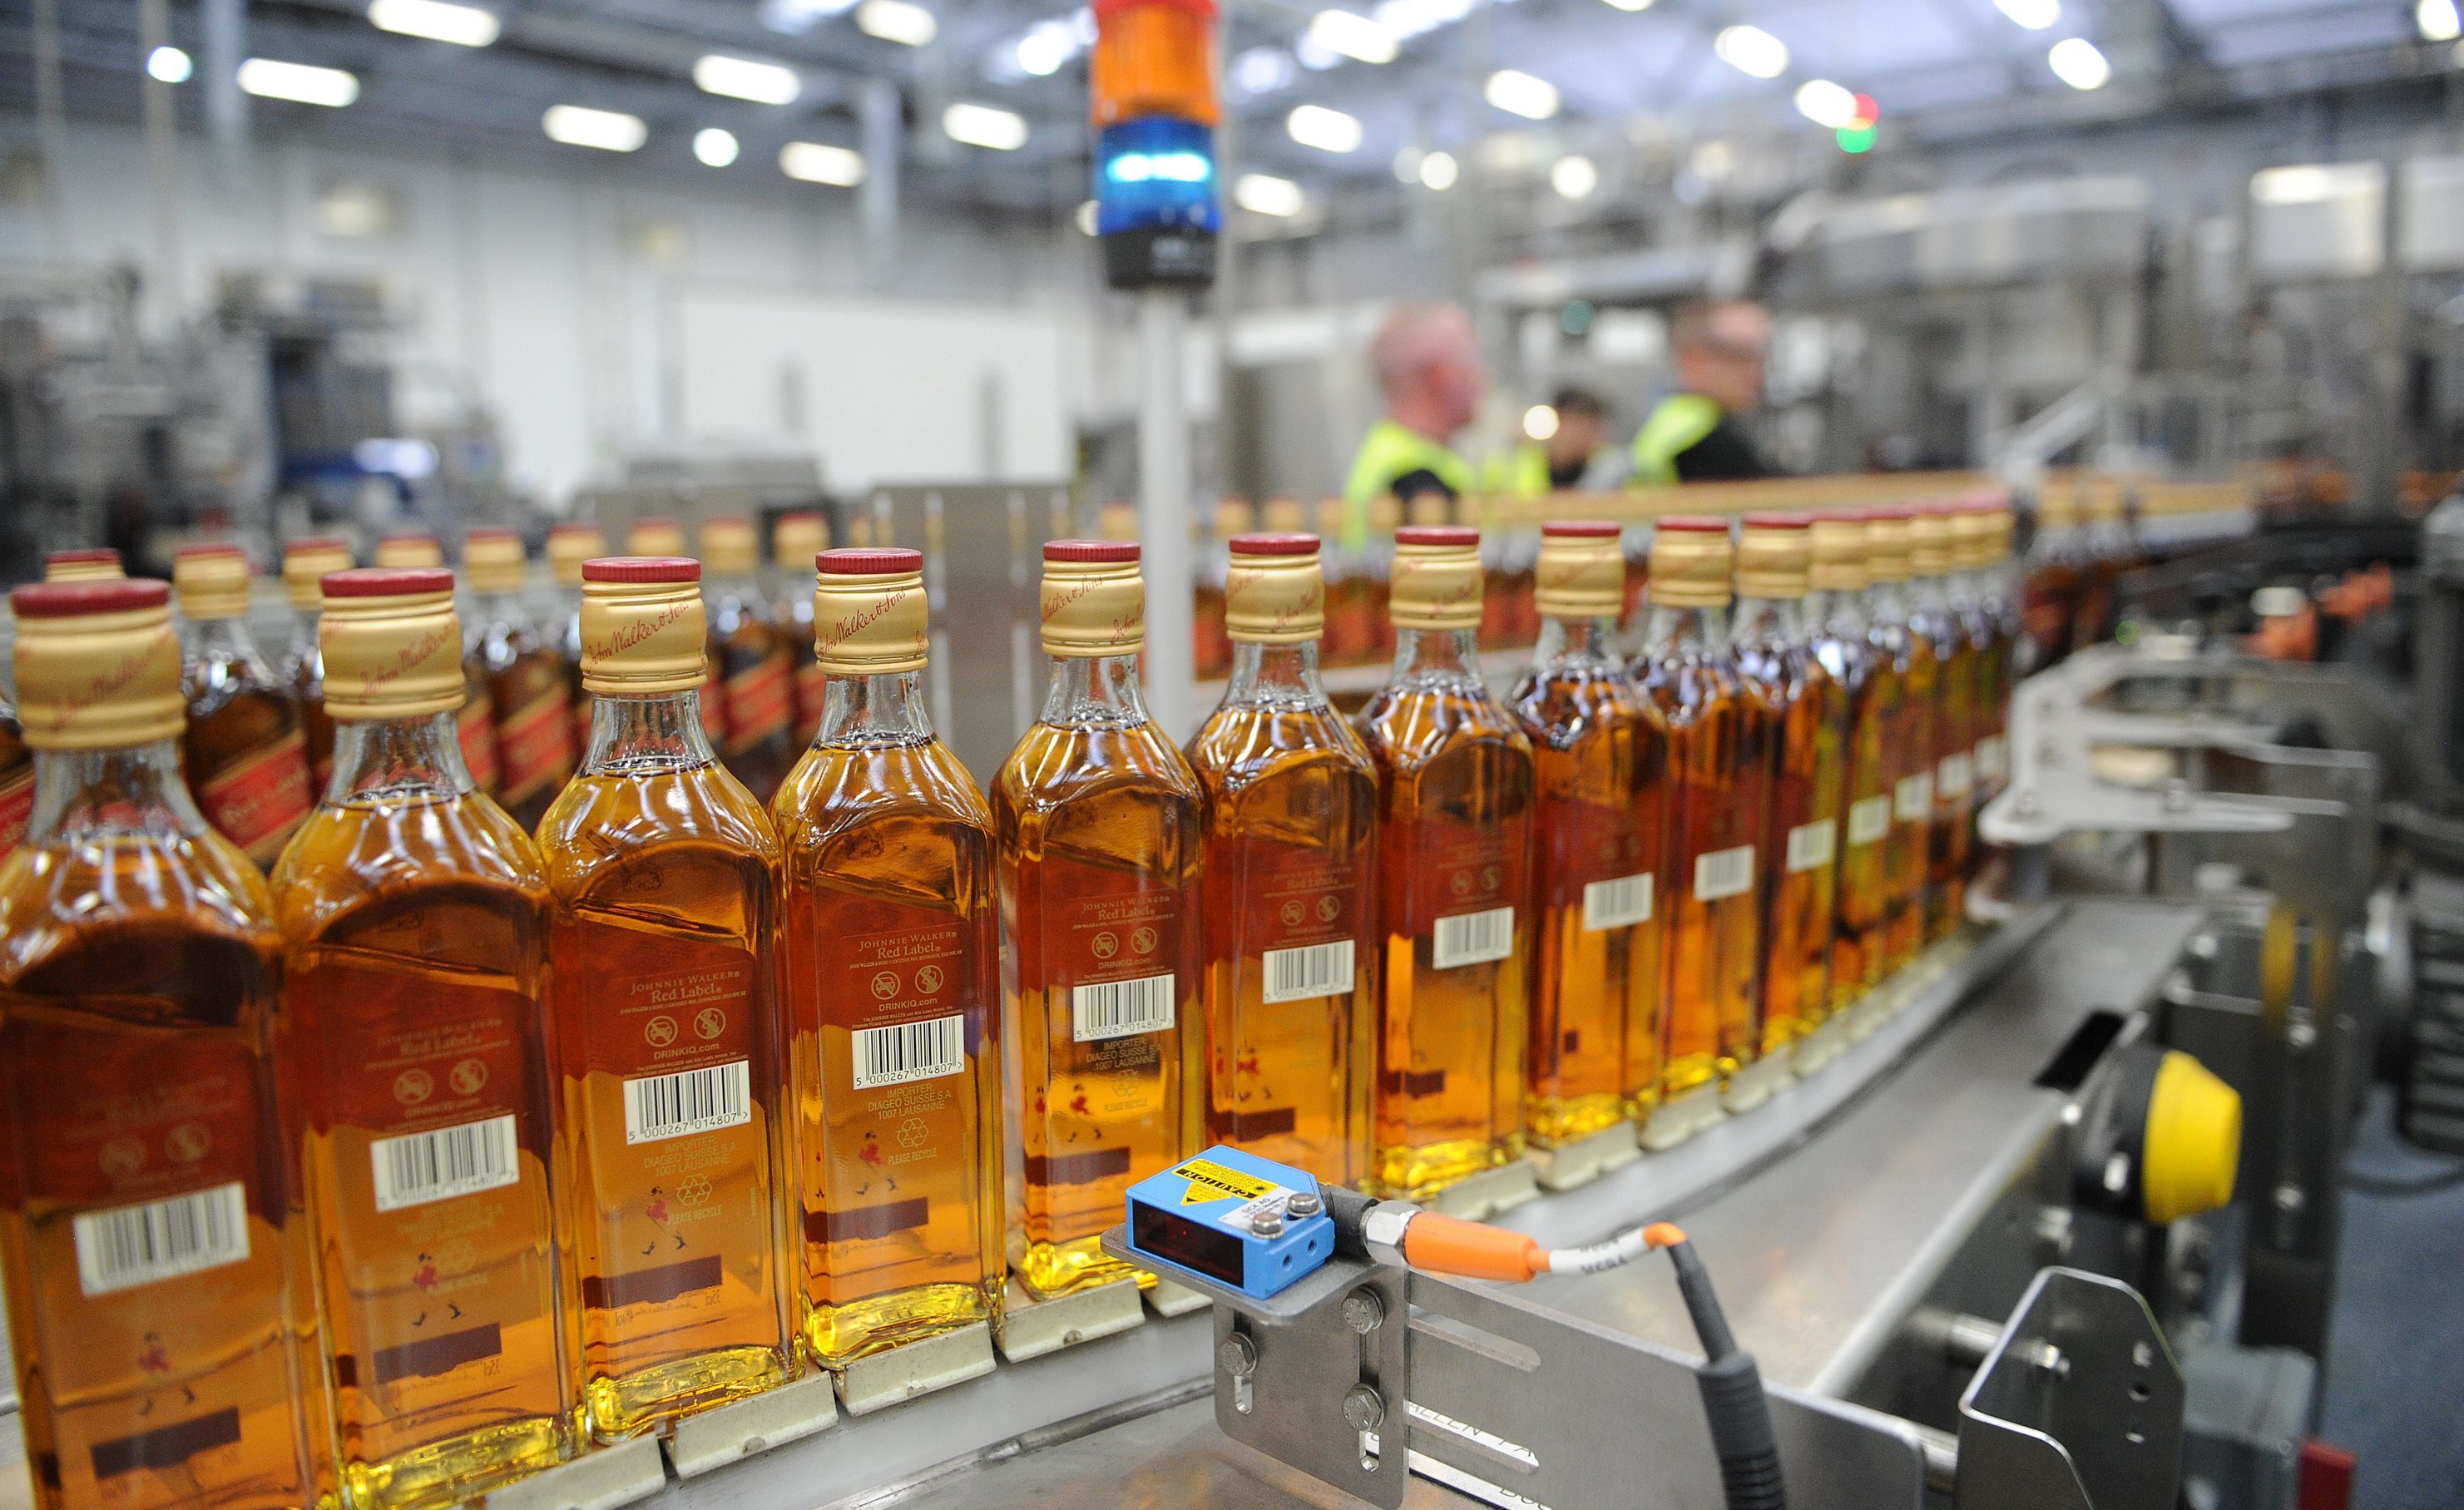 One of the bottling lines at Diageo's facility in Levenmouth. Industry bosses have warned a tax could threaten jobs.